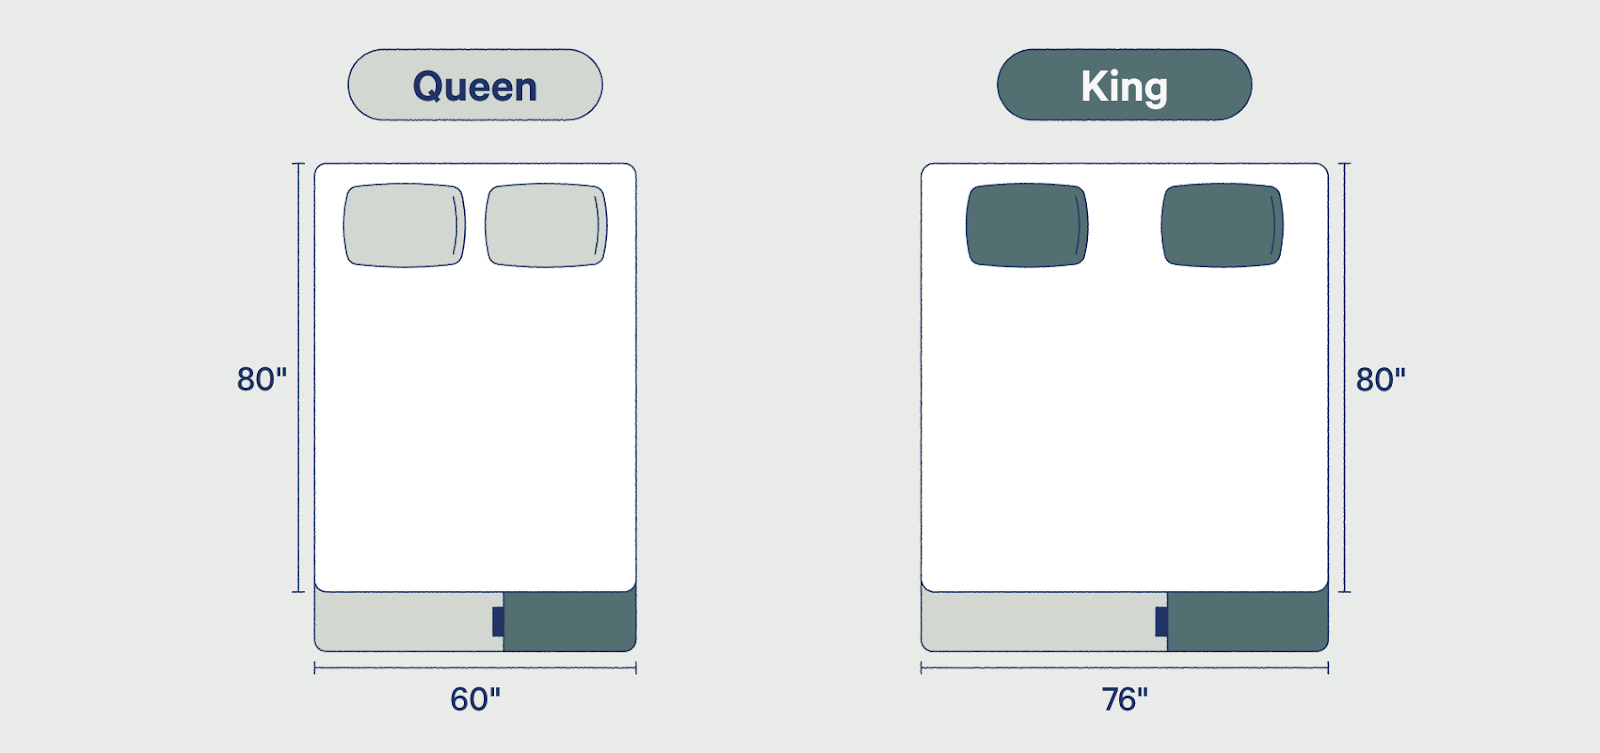 King Vs Queen Bed Size And Comparison, King Bed Measurements In Feet